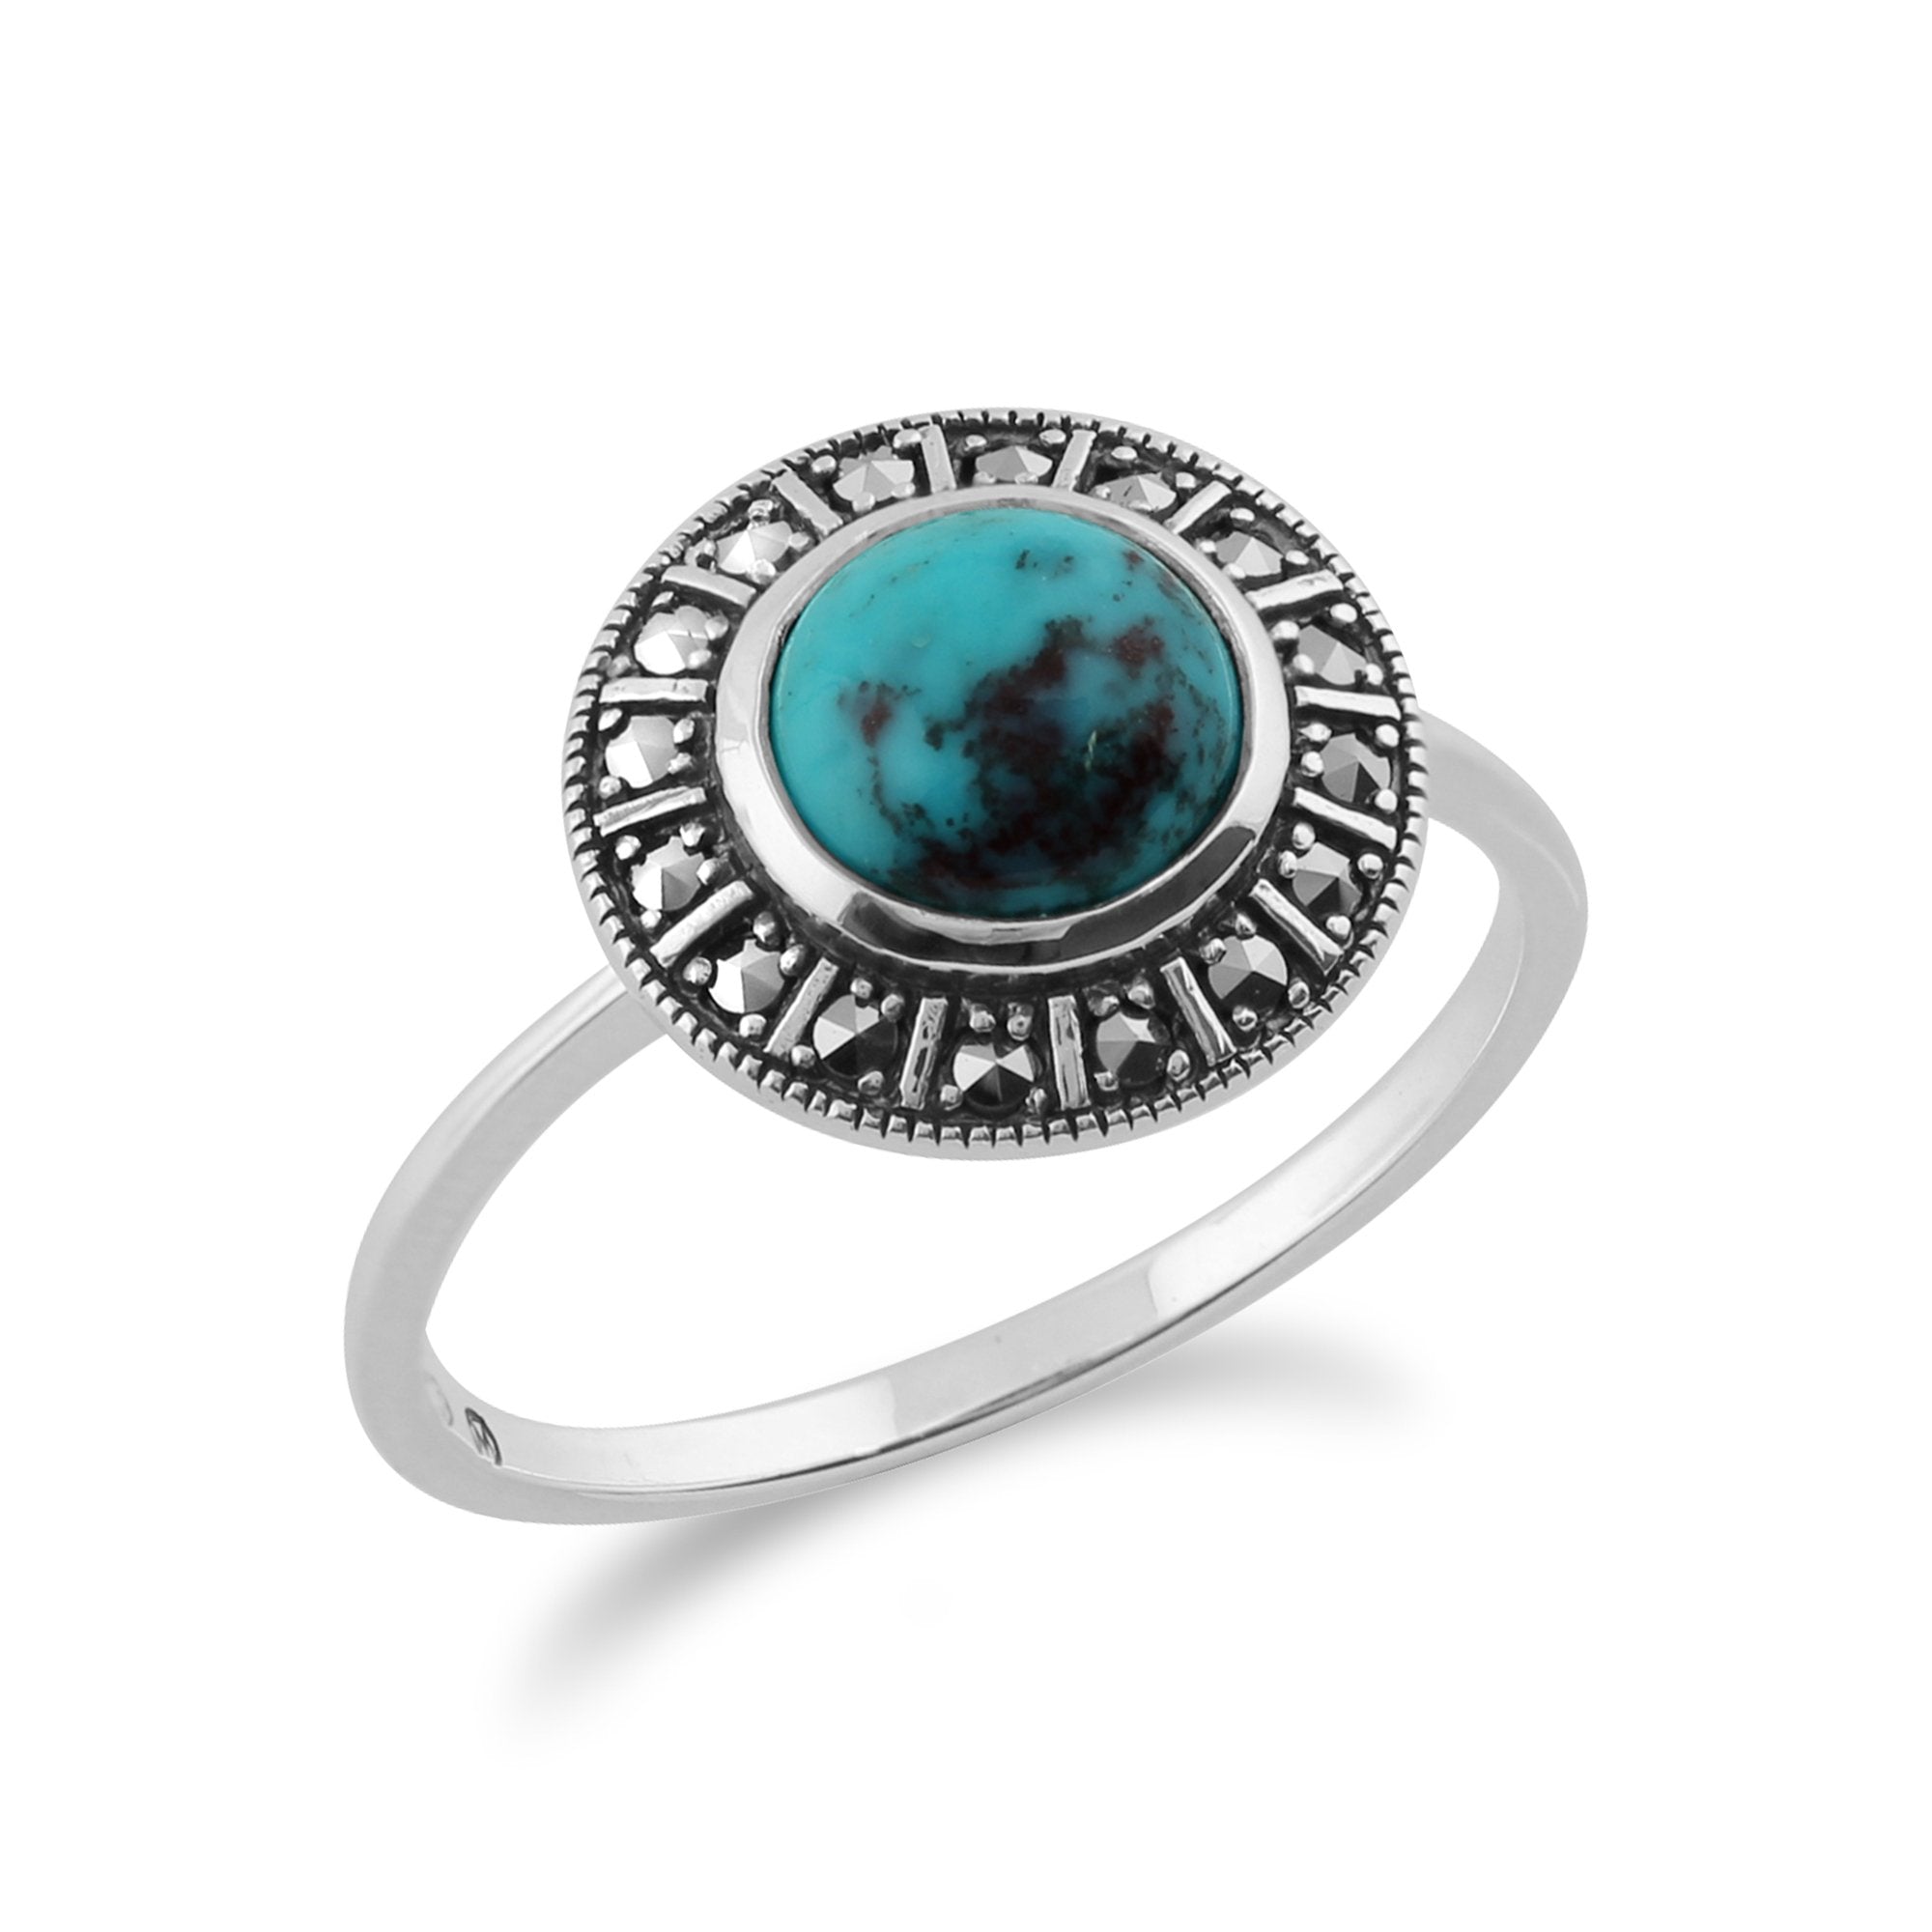 Art Deco Style Round Turquoise Cabochon & Marcasite Halo Ring in 925 Sterling Silver